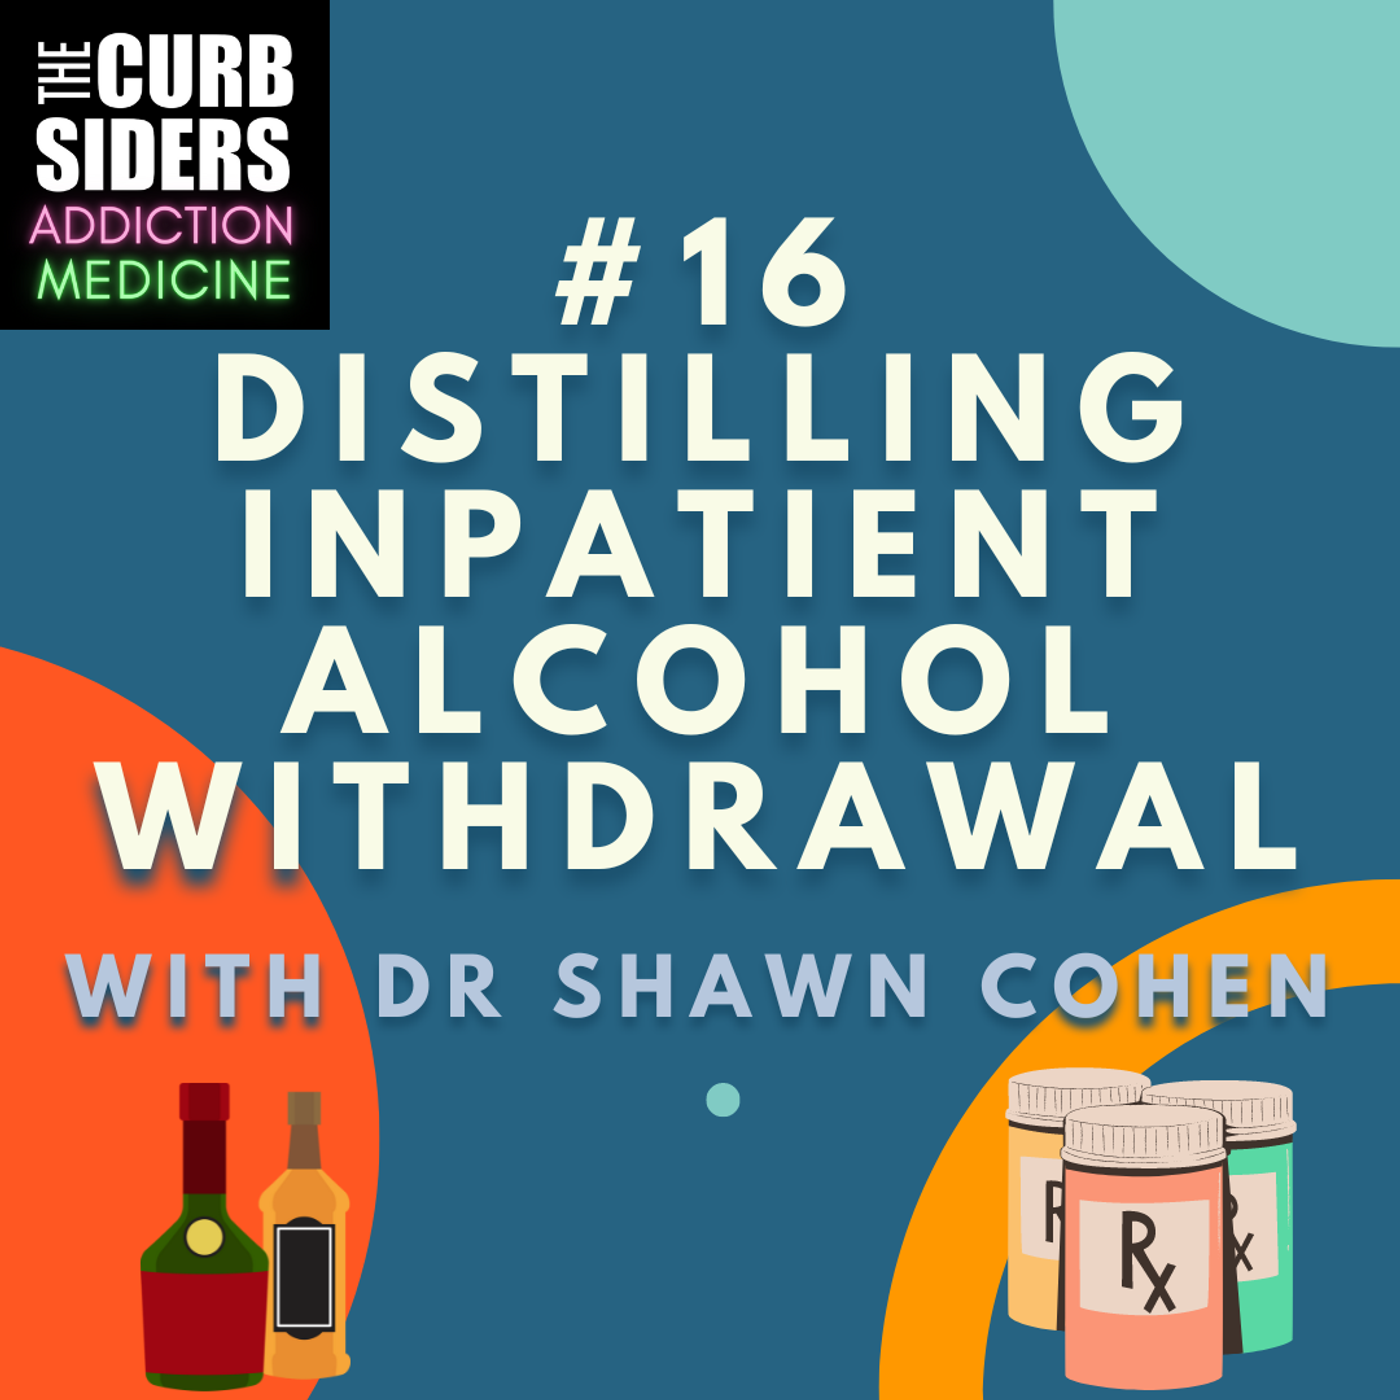 S2 Ep5: #16 Distilling Inpatient Alcohol Withdrawal with Dr. Shawn Cohen